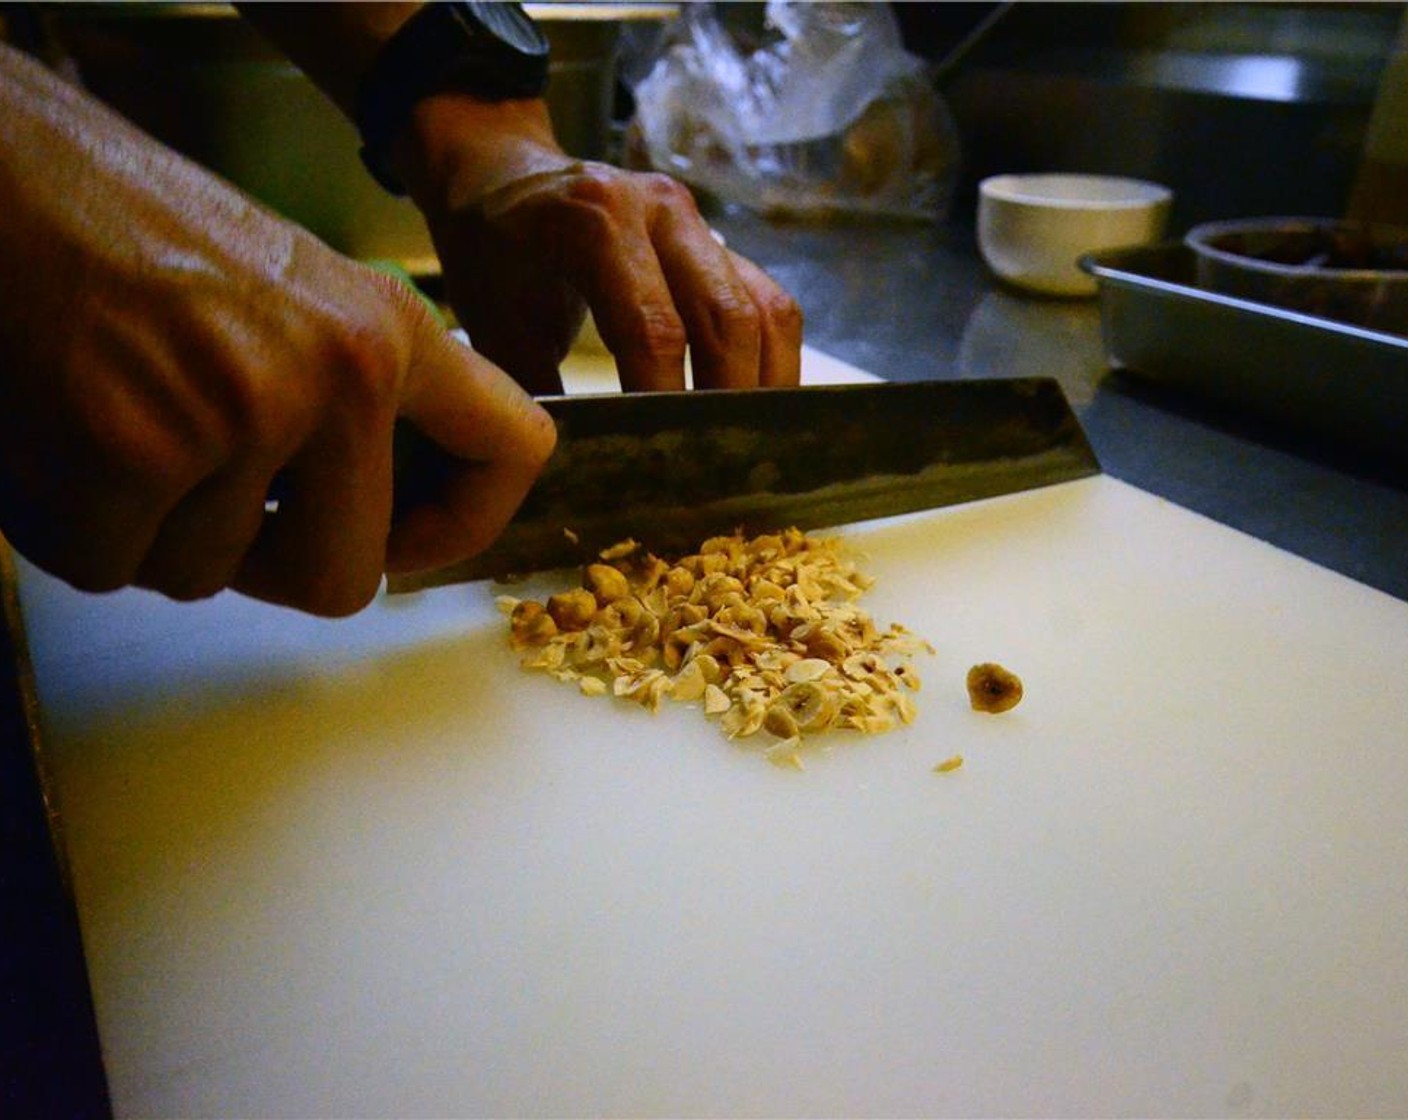 step 10 While waiting, prepare the Hazelnuts (1/2 cup) by chopping them.